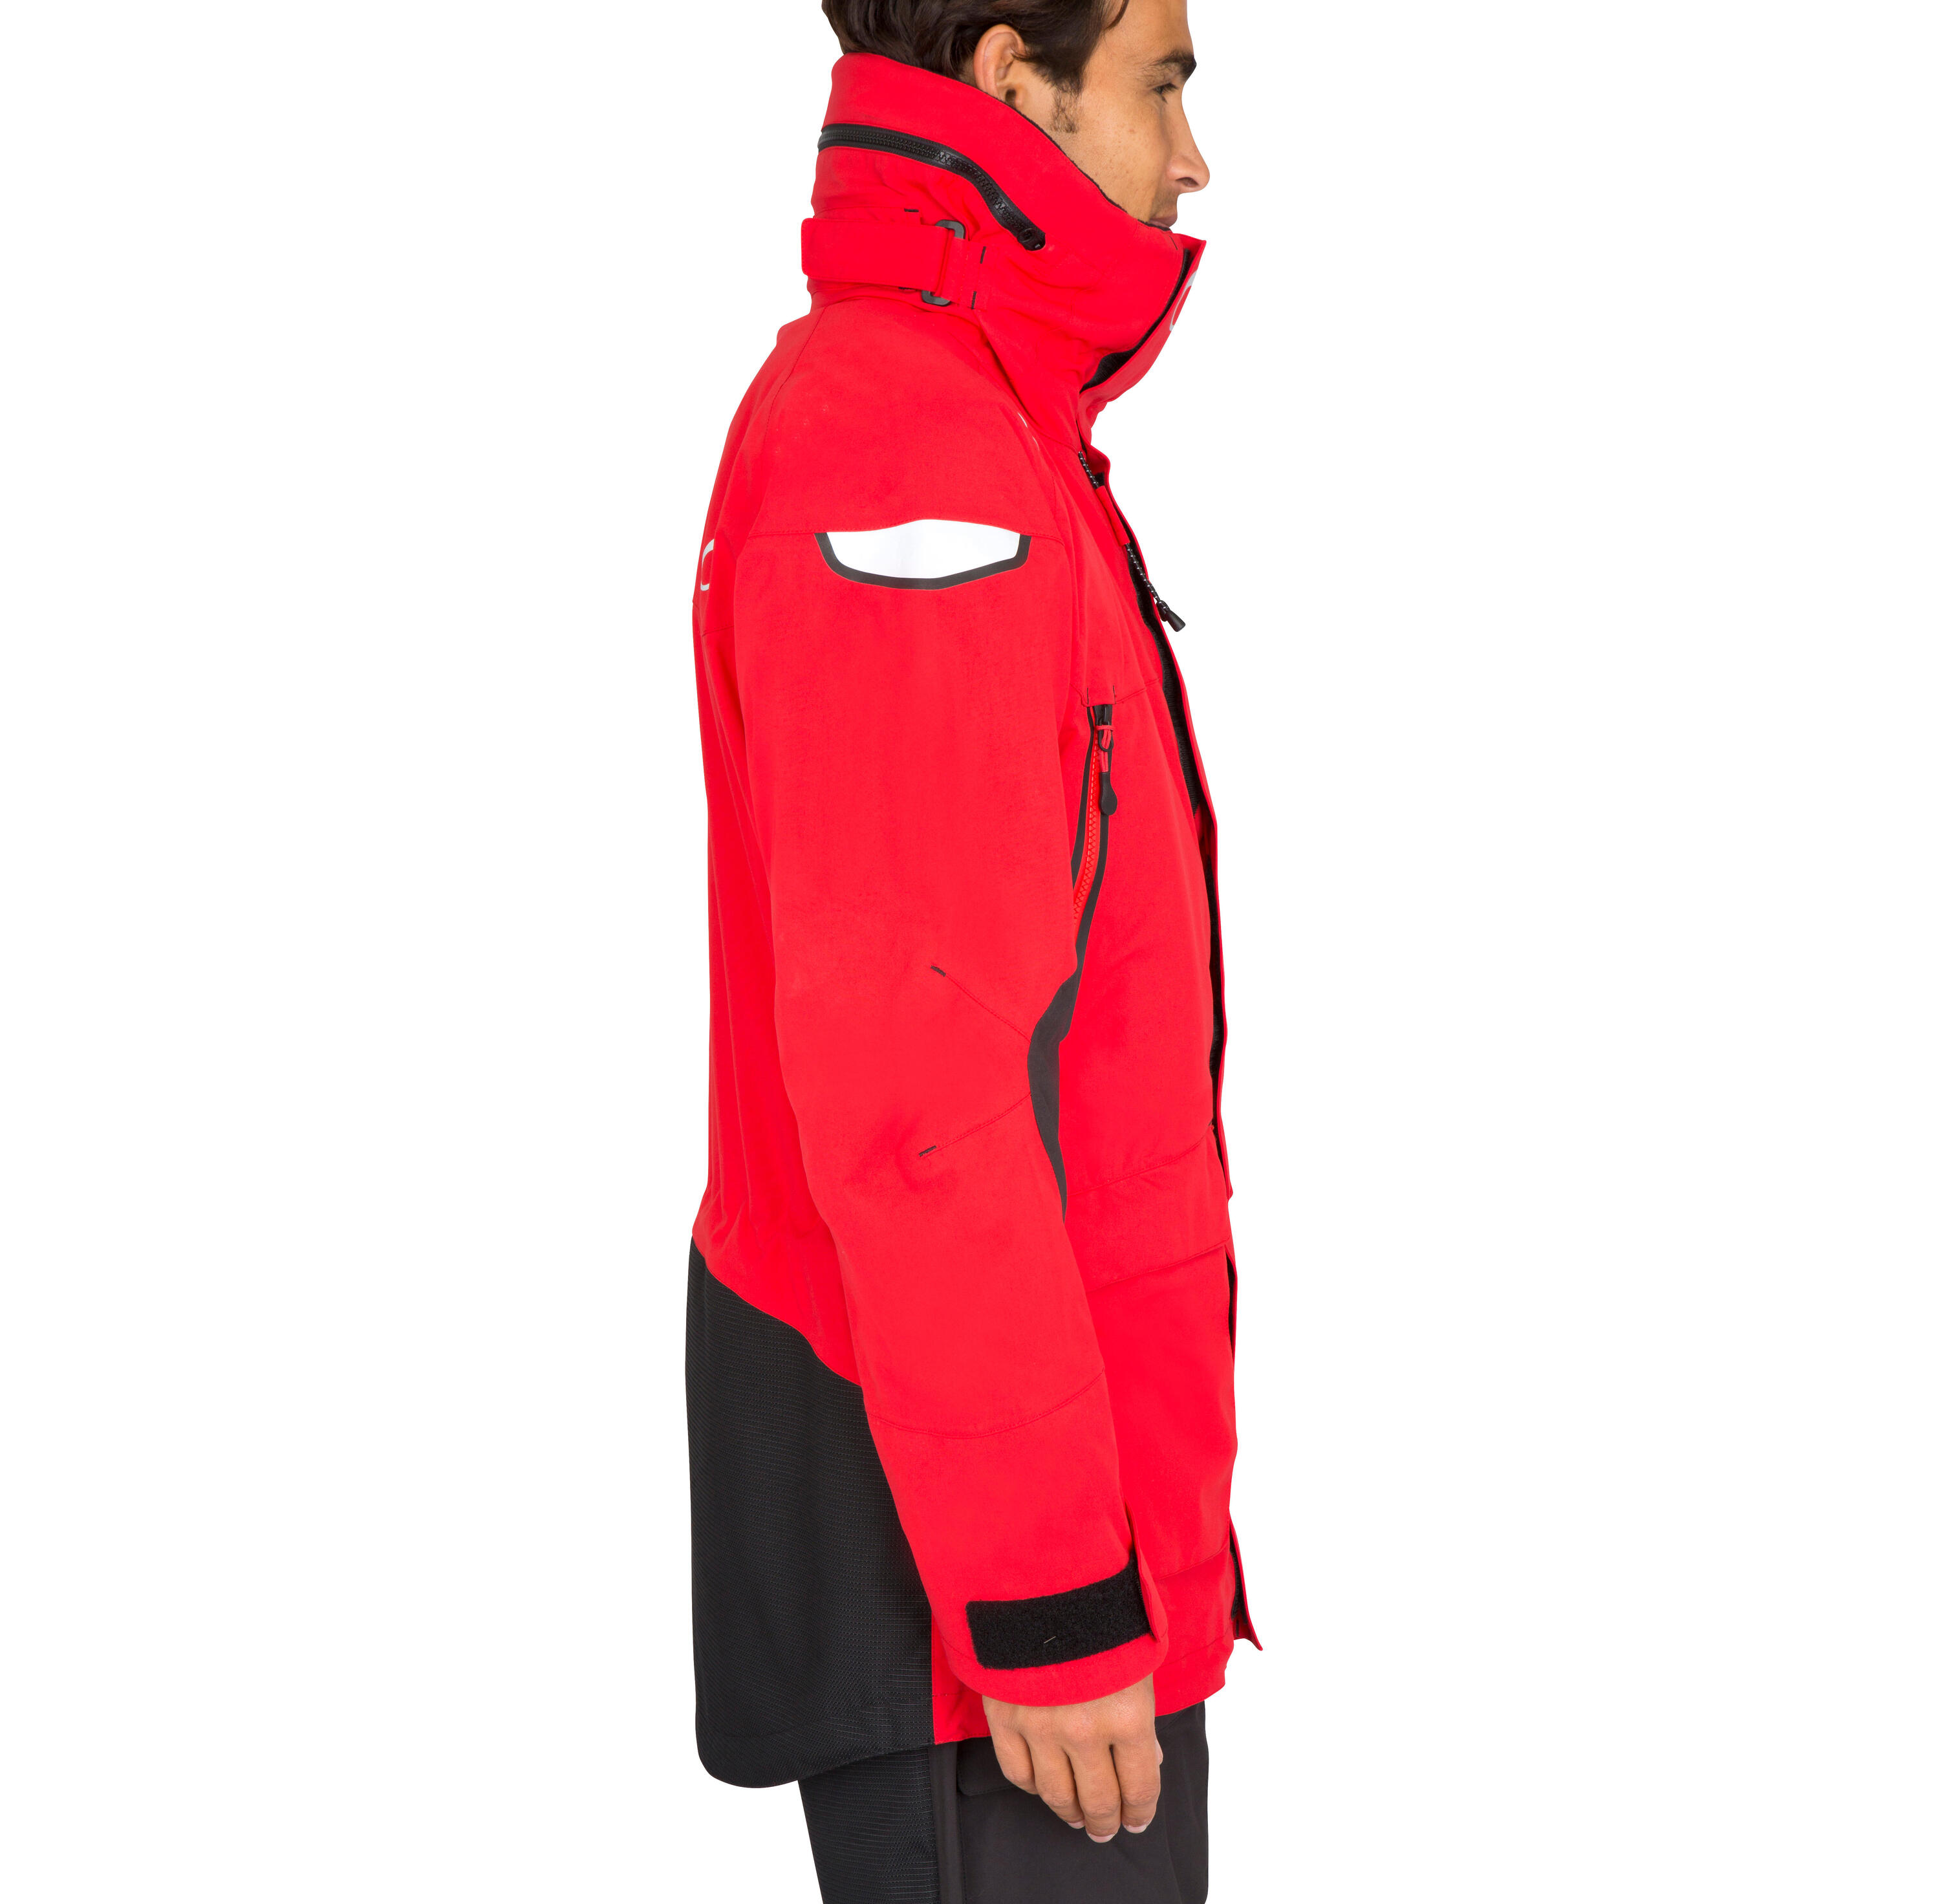 Ozean 900 Men's Waterproof and Breathable Sailing Jacket - Red 5/44